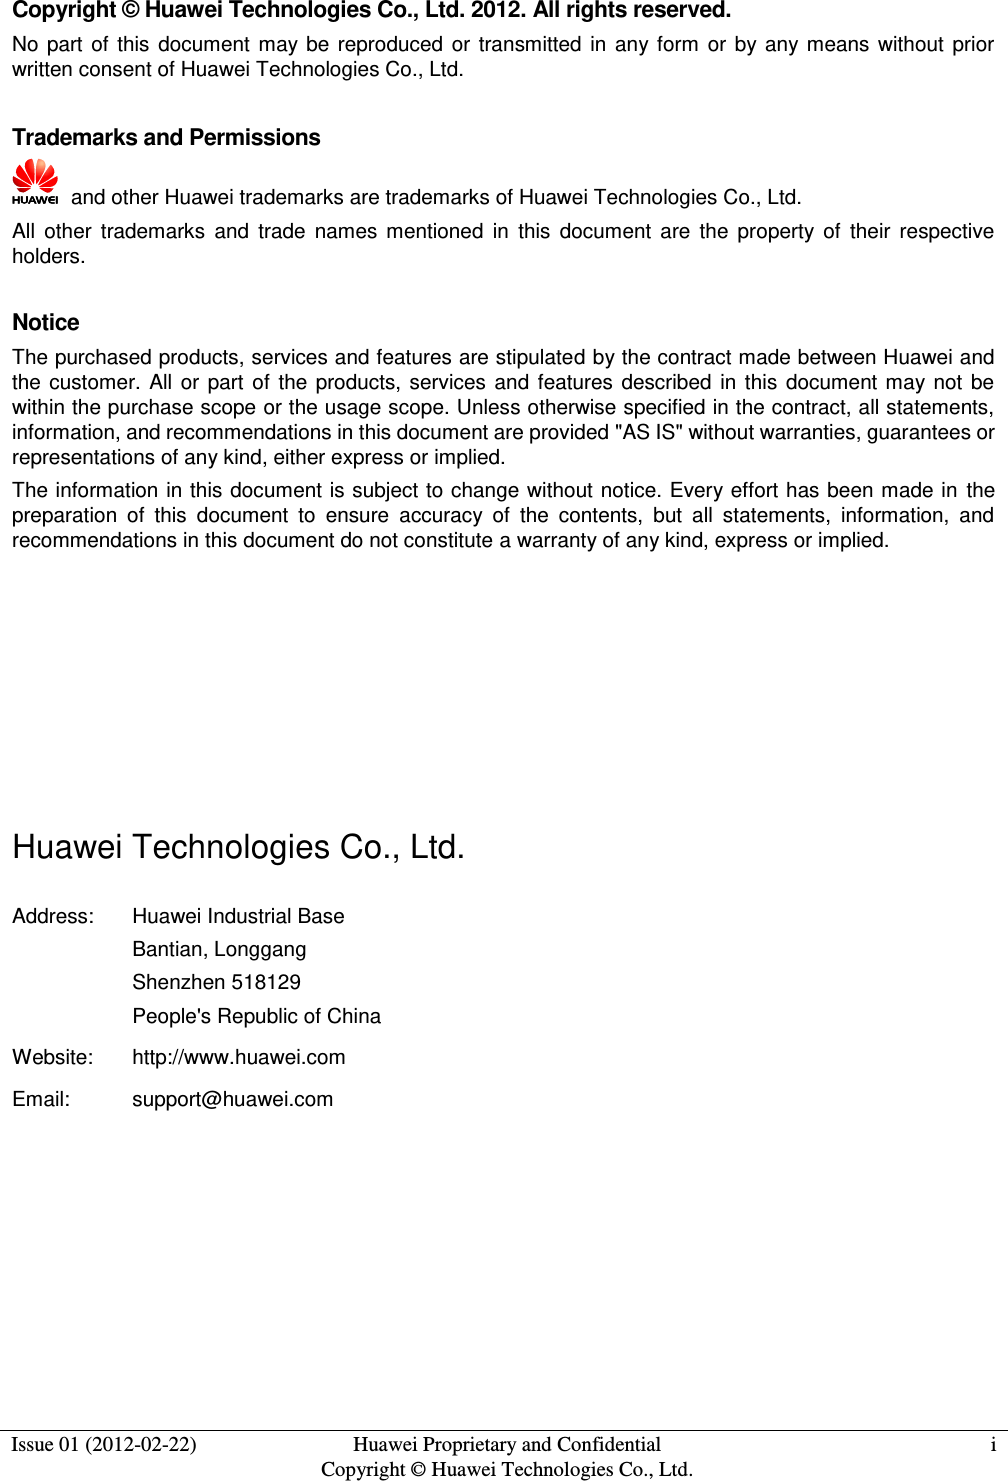  Issue 01 (2012-02-22) Huawei Proprietary and Confidential         Copyright © Huawei Technologies Co., Ltd. i  Copyright © Huawei Technologies Co., Ltd. 2012. All rights reserved. No  part  of  this  document  may  be  reproduced  or  transmitted  in  any form  or  by any  means  without  prior written consent of Huawei Technologies Co., Ltd.  Trademarks and Permissions   and other Huawei trademarks are trademarks of Huawei Technologies Co., Ltd. All  other  trademarks  and  trade  names  mentioned  in  this  document  are  the  property  of  their  respective holders.  Notice The purchased products, services and features are stipulated by the contract made between Huawei and the  customer.  All  or  part  of  the  products,  services  and  features  described  in this  document  may  not  be within the purchase scope or the usage scope. Unless otherwise specified in the contract, all statements, information, and recommendations in this document are provided &quot;AS IS&quot; without warranties, guarantees or representations of any kind, either express or implied. The information in this document is subject to change without notice. Every effort has been made in  the preparation  of  this  document  to  ensure  accuracy  of  the  contents,  but  all  statements,  information,  and recommendations in this document do not constitute a warranty of any kind, express or implied.       Huawei Technologies Co., Ltd. Address: Huawei Industrial Base Bantian, Longgang Shenzhen 518129 People&apos;s Republic of China Website: http://www.huawei.com Email: support@huawei.com   